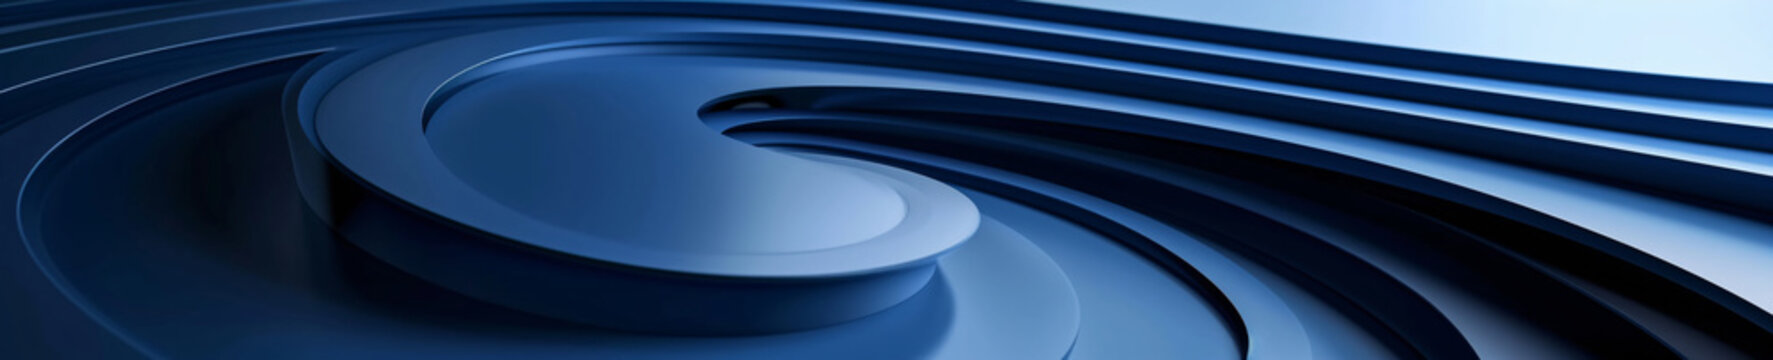 A digitally created image featuring smooth, sleek blue concentric structures swirling inward, depicting motion and modernity.